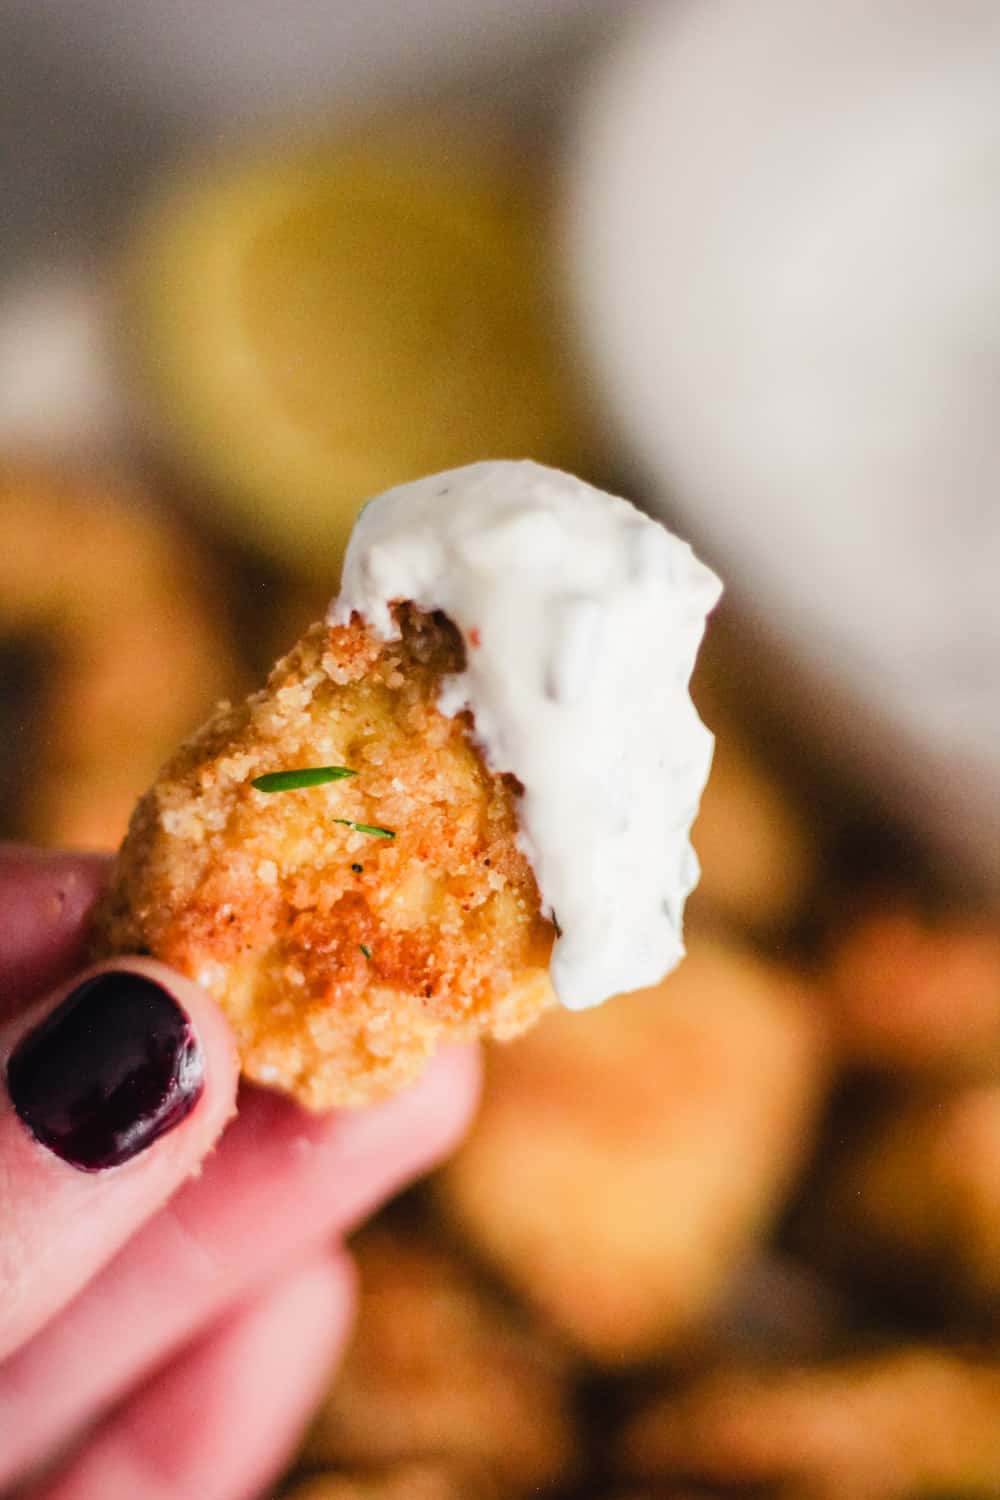 Close-up of a hand holding a crispy tofu nugget dipped in yogurt ranch sauce.